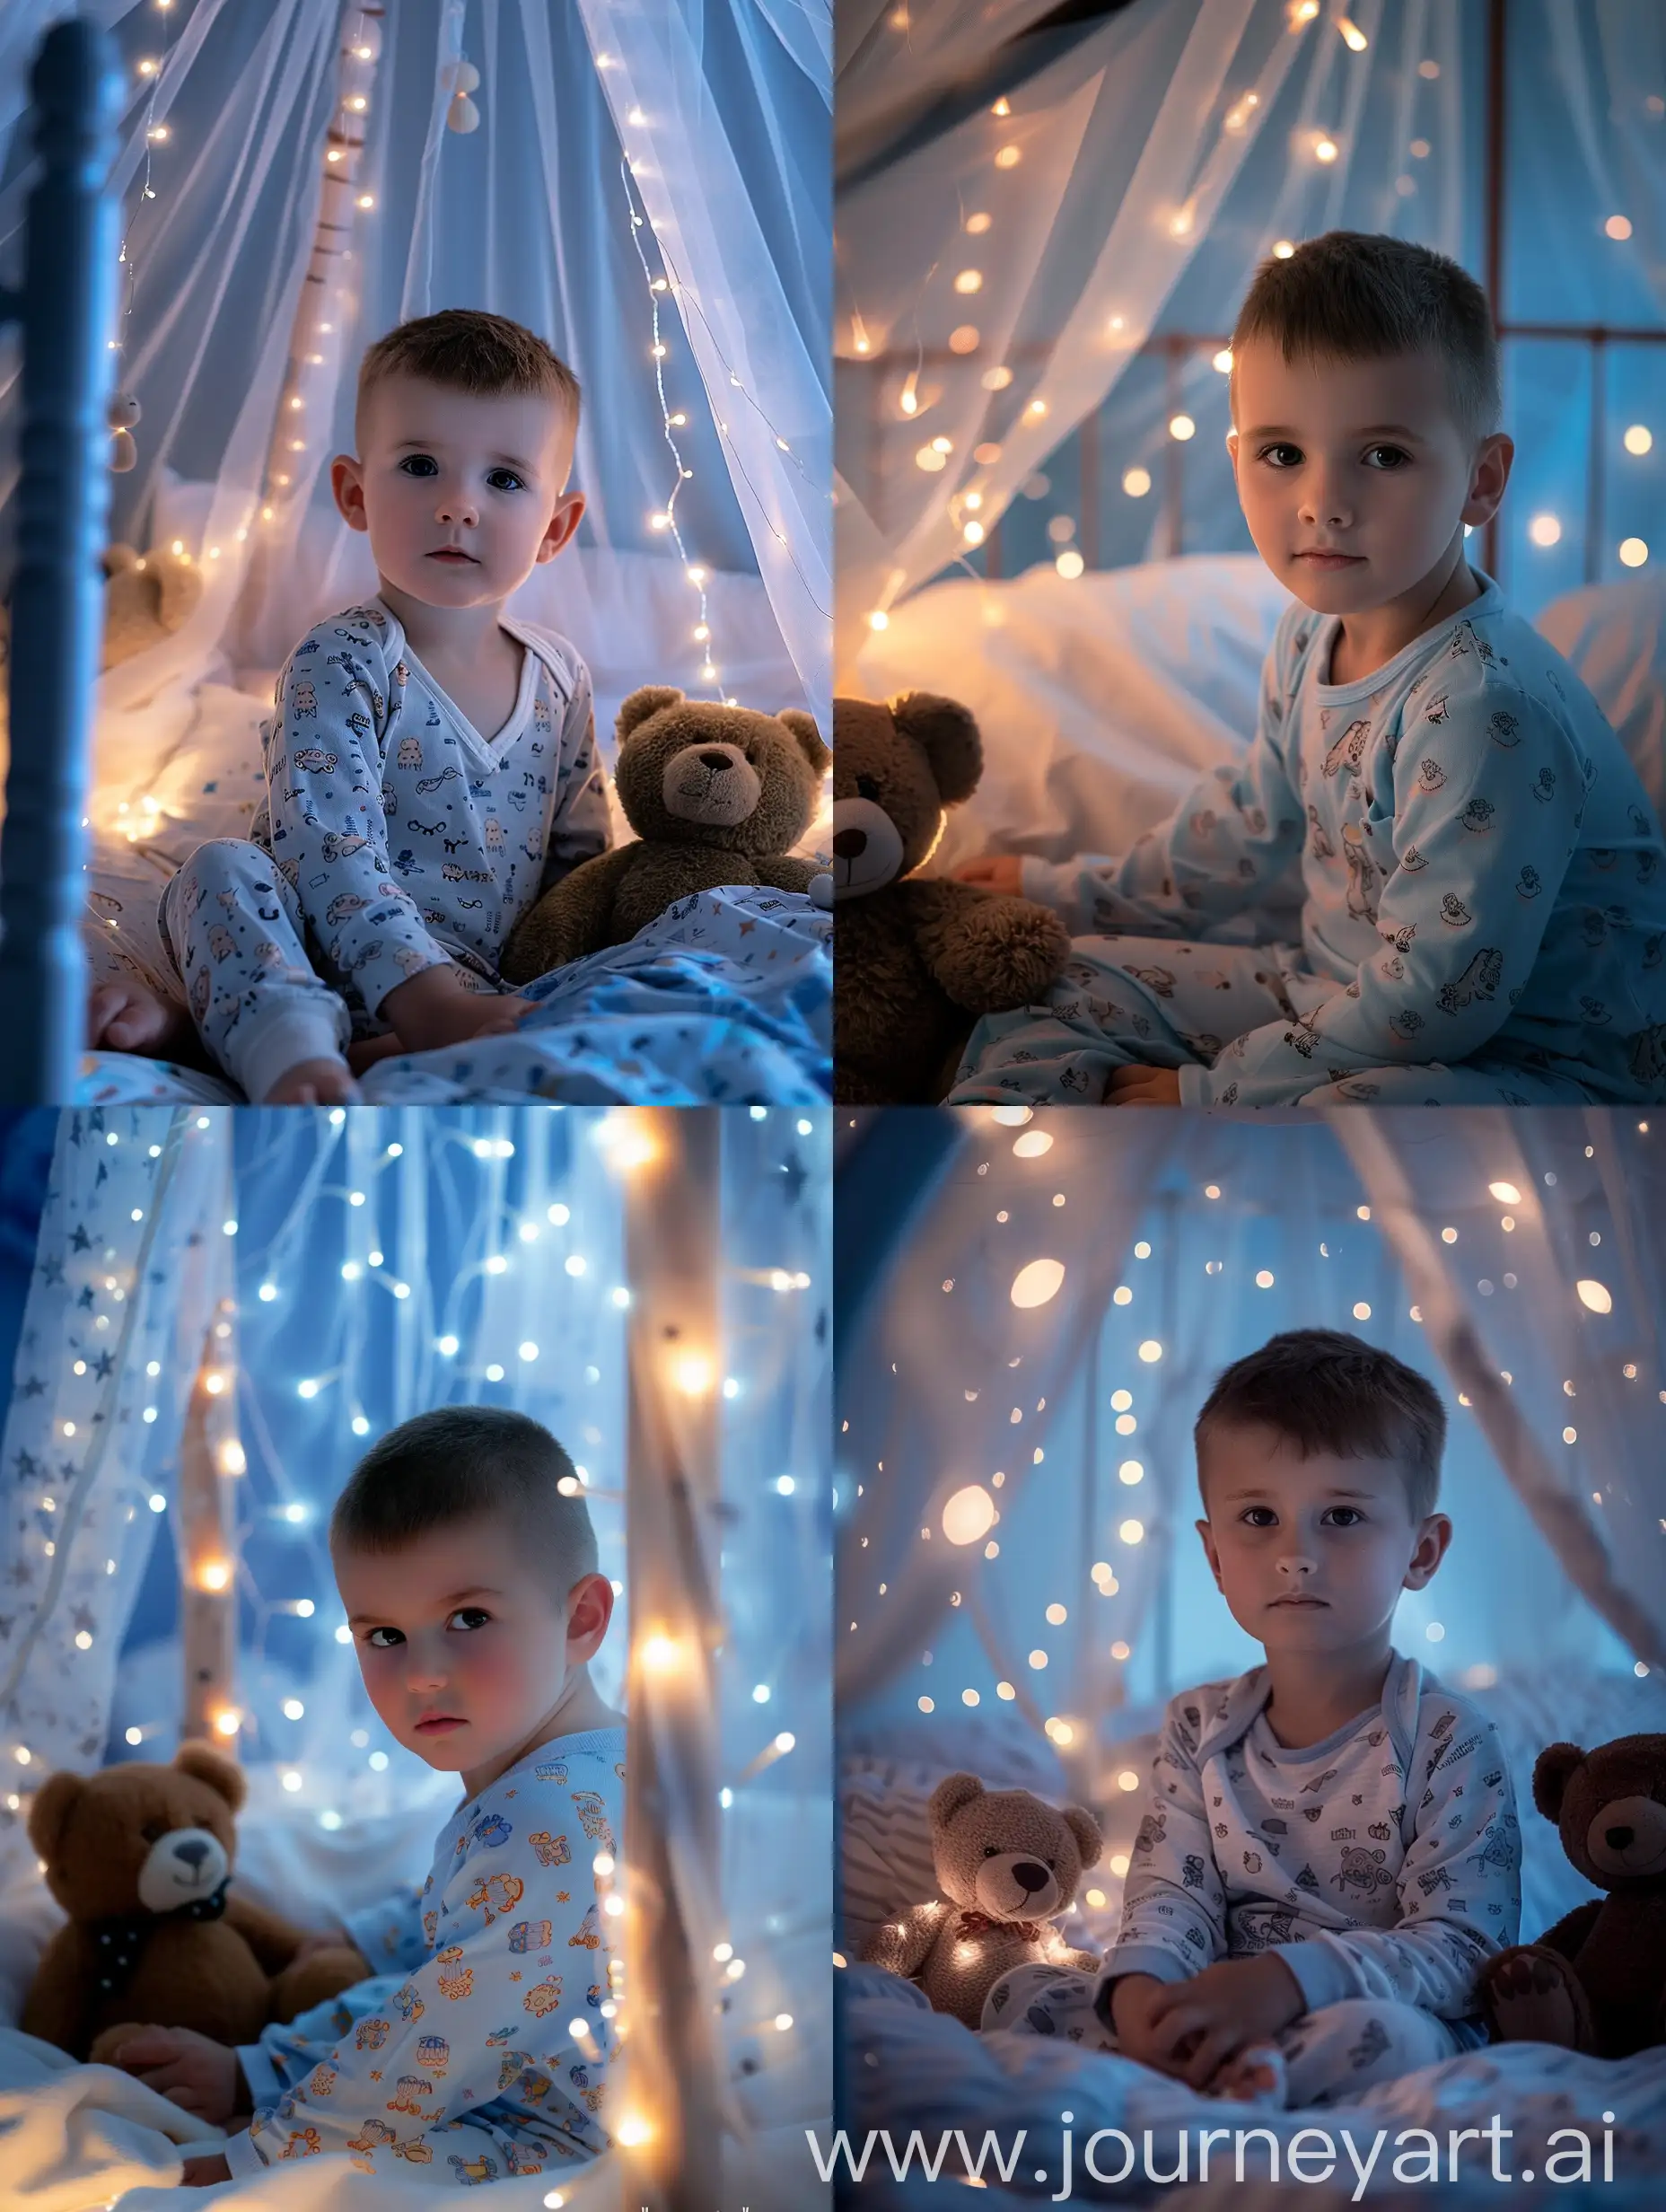 Boy-in-Pajamas-Sitting-on-Glowing-Canopy-Bed-with-Teddy-Bear